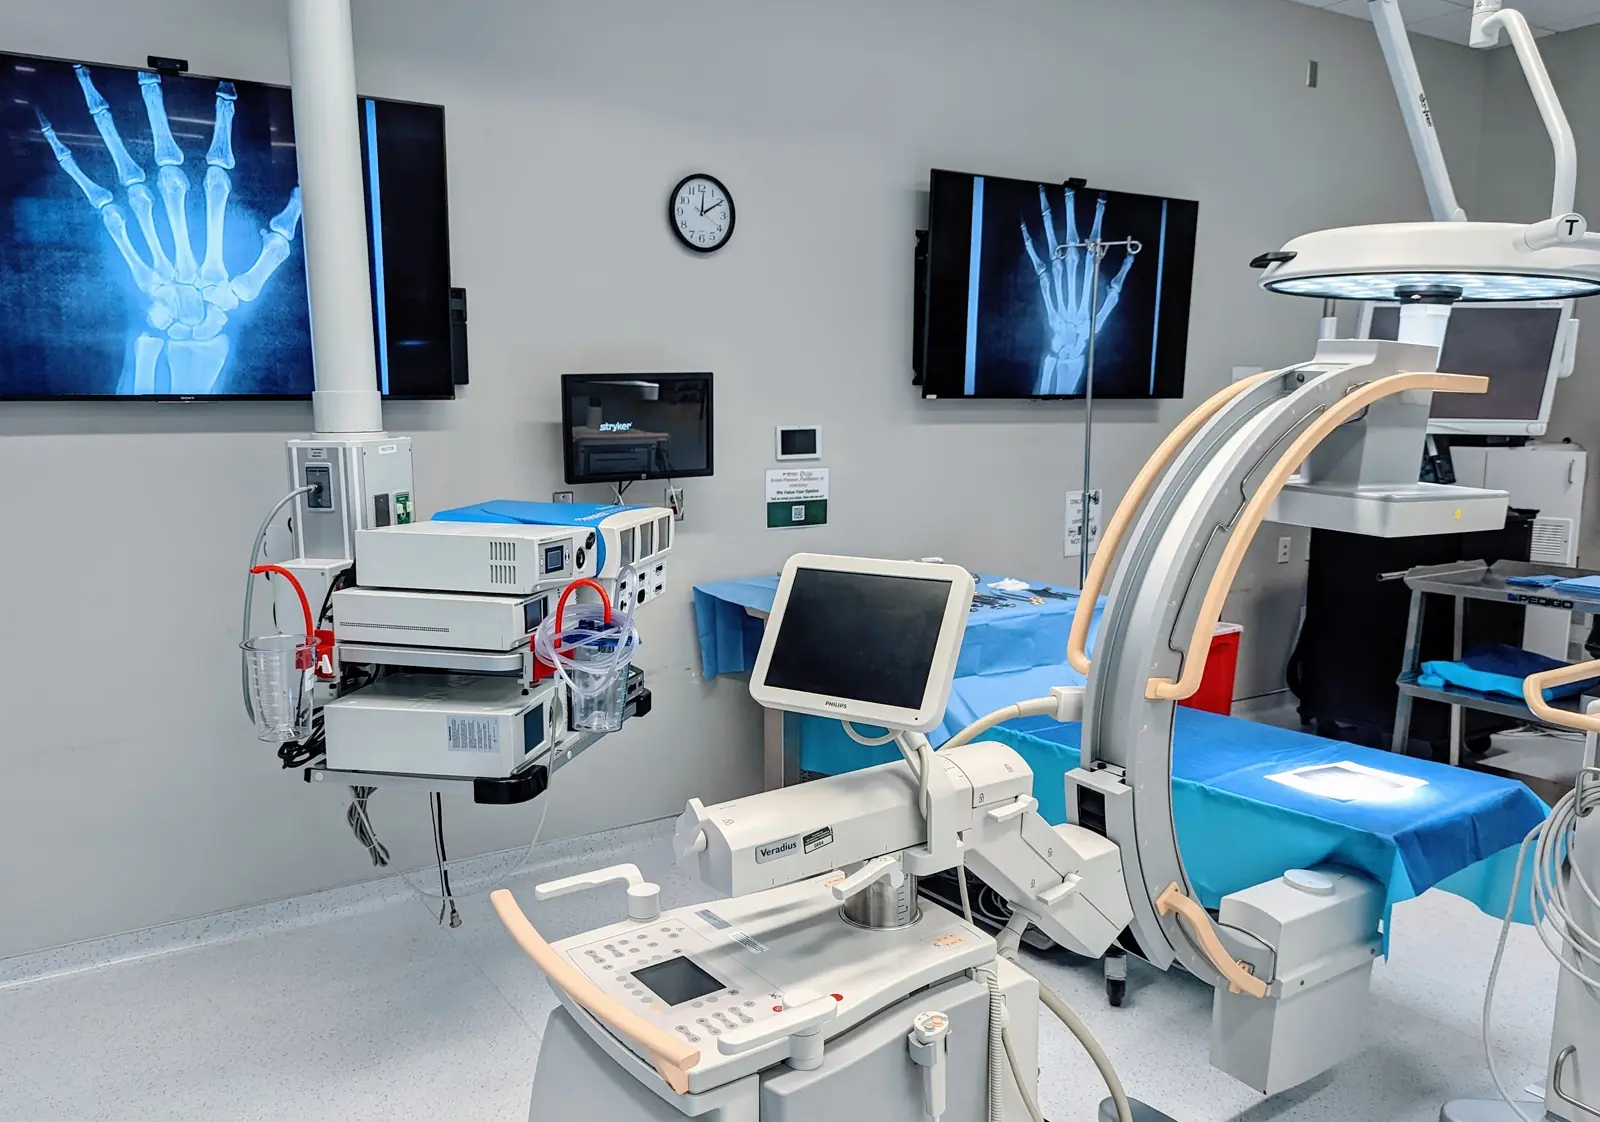 CAMLS A modern medical room with advanced equipment including monitors displaying X-ray images of a hand, surgical machines, a mobile C-arm, and a surgical table. The room is well-lit and organized, suggesting it's prepared for a surgical procedure.